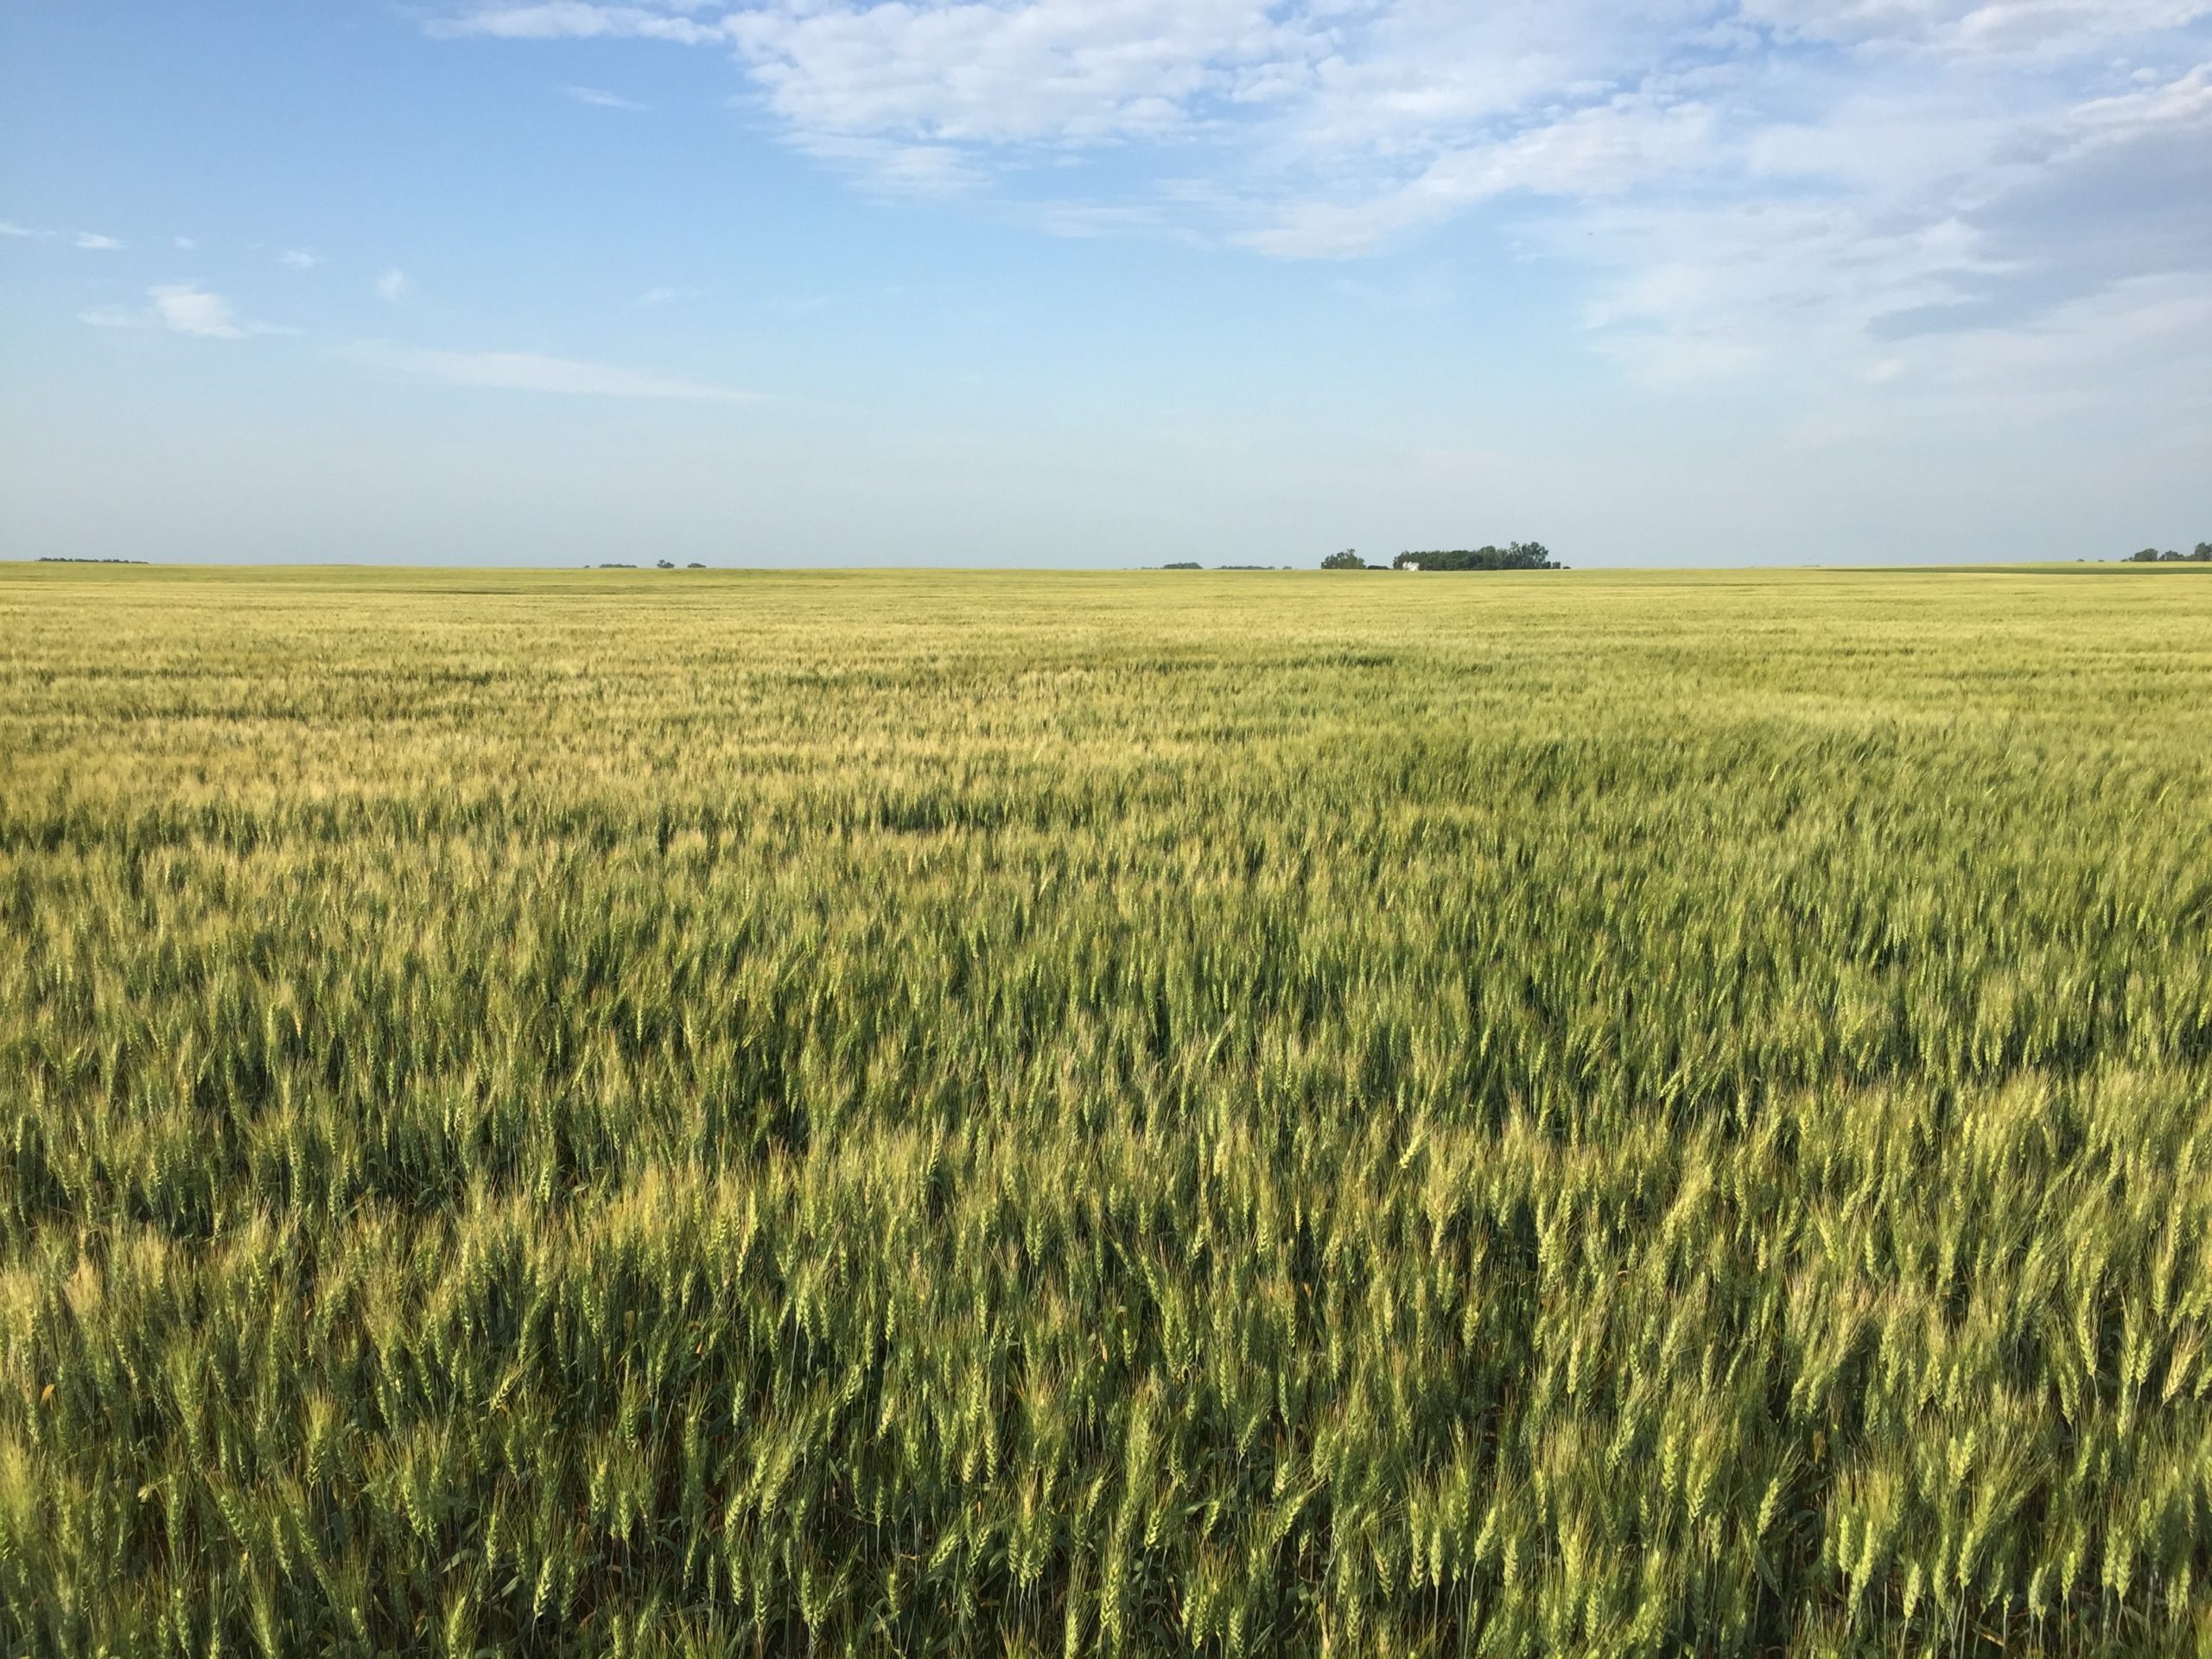 Wheat field to illustrate wheat stocks-to-use ratio story.